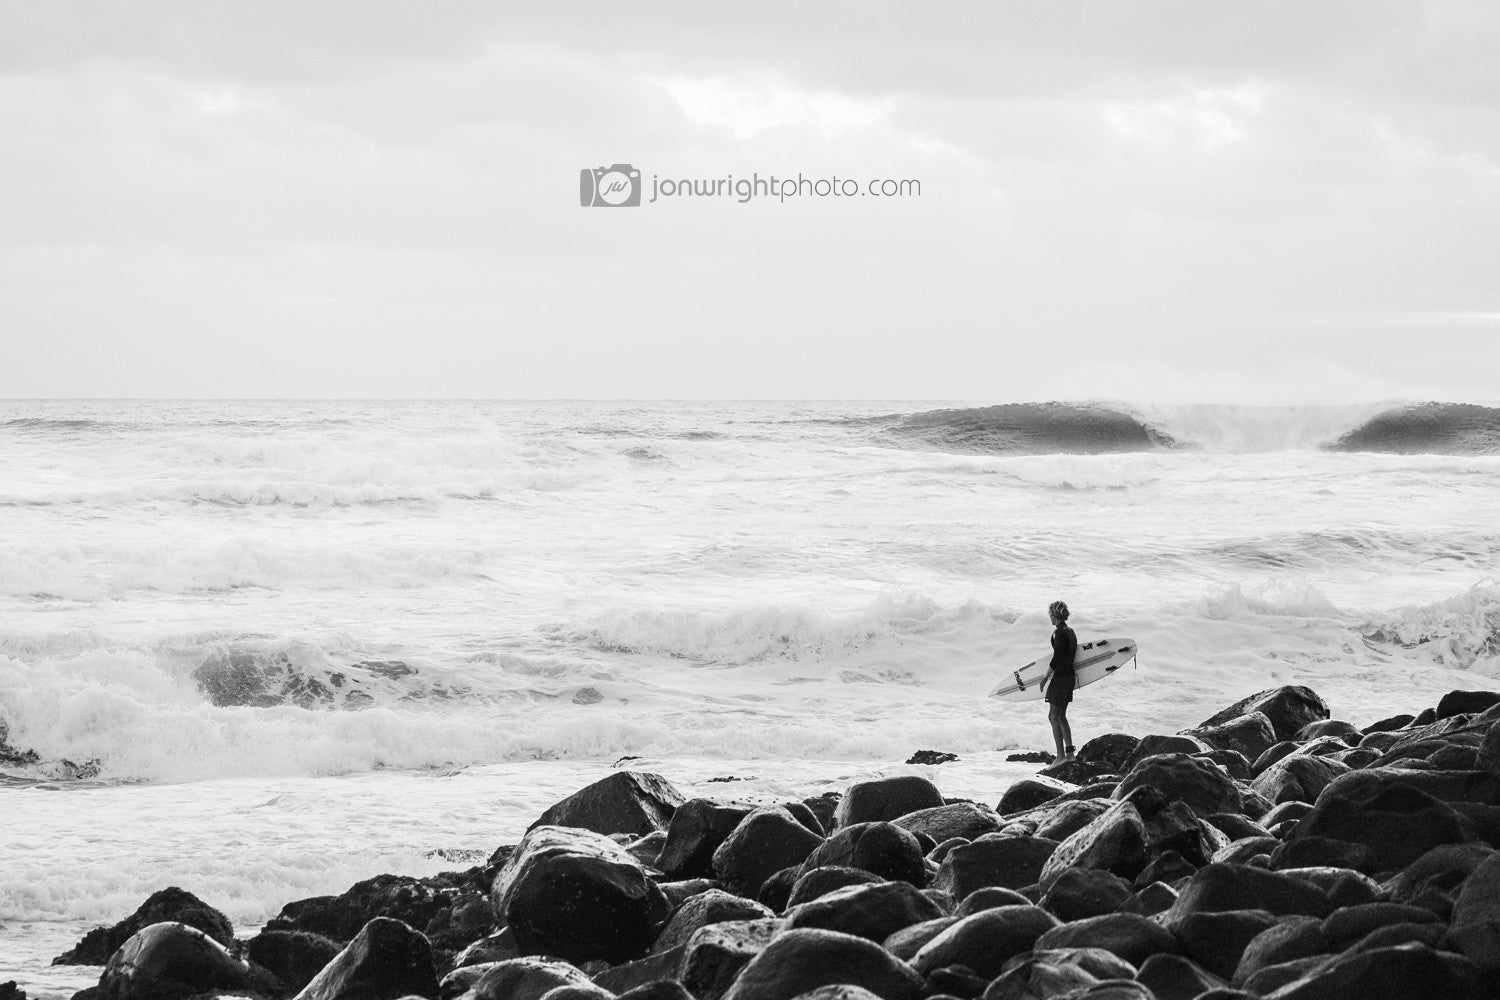 The lone surfer - Burleigh Heads